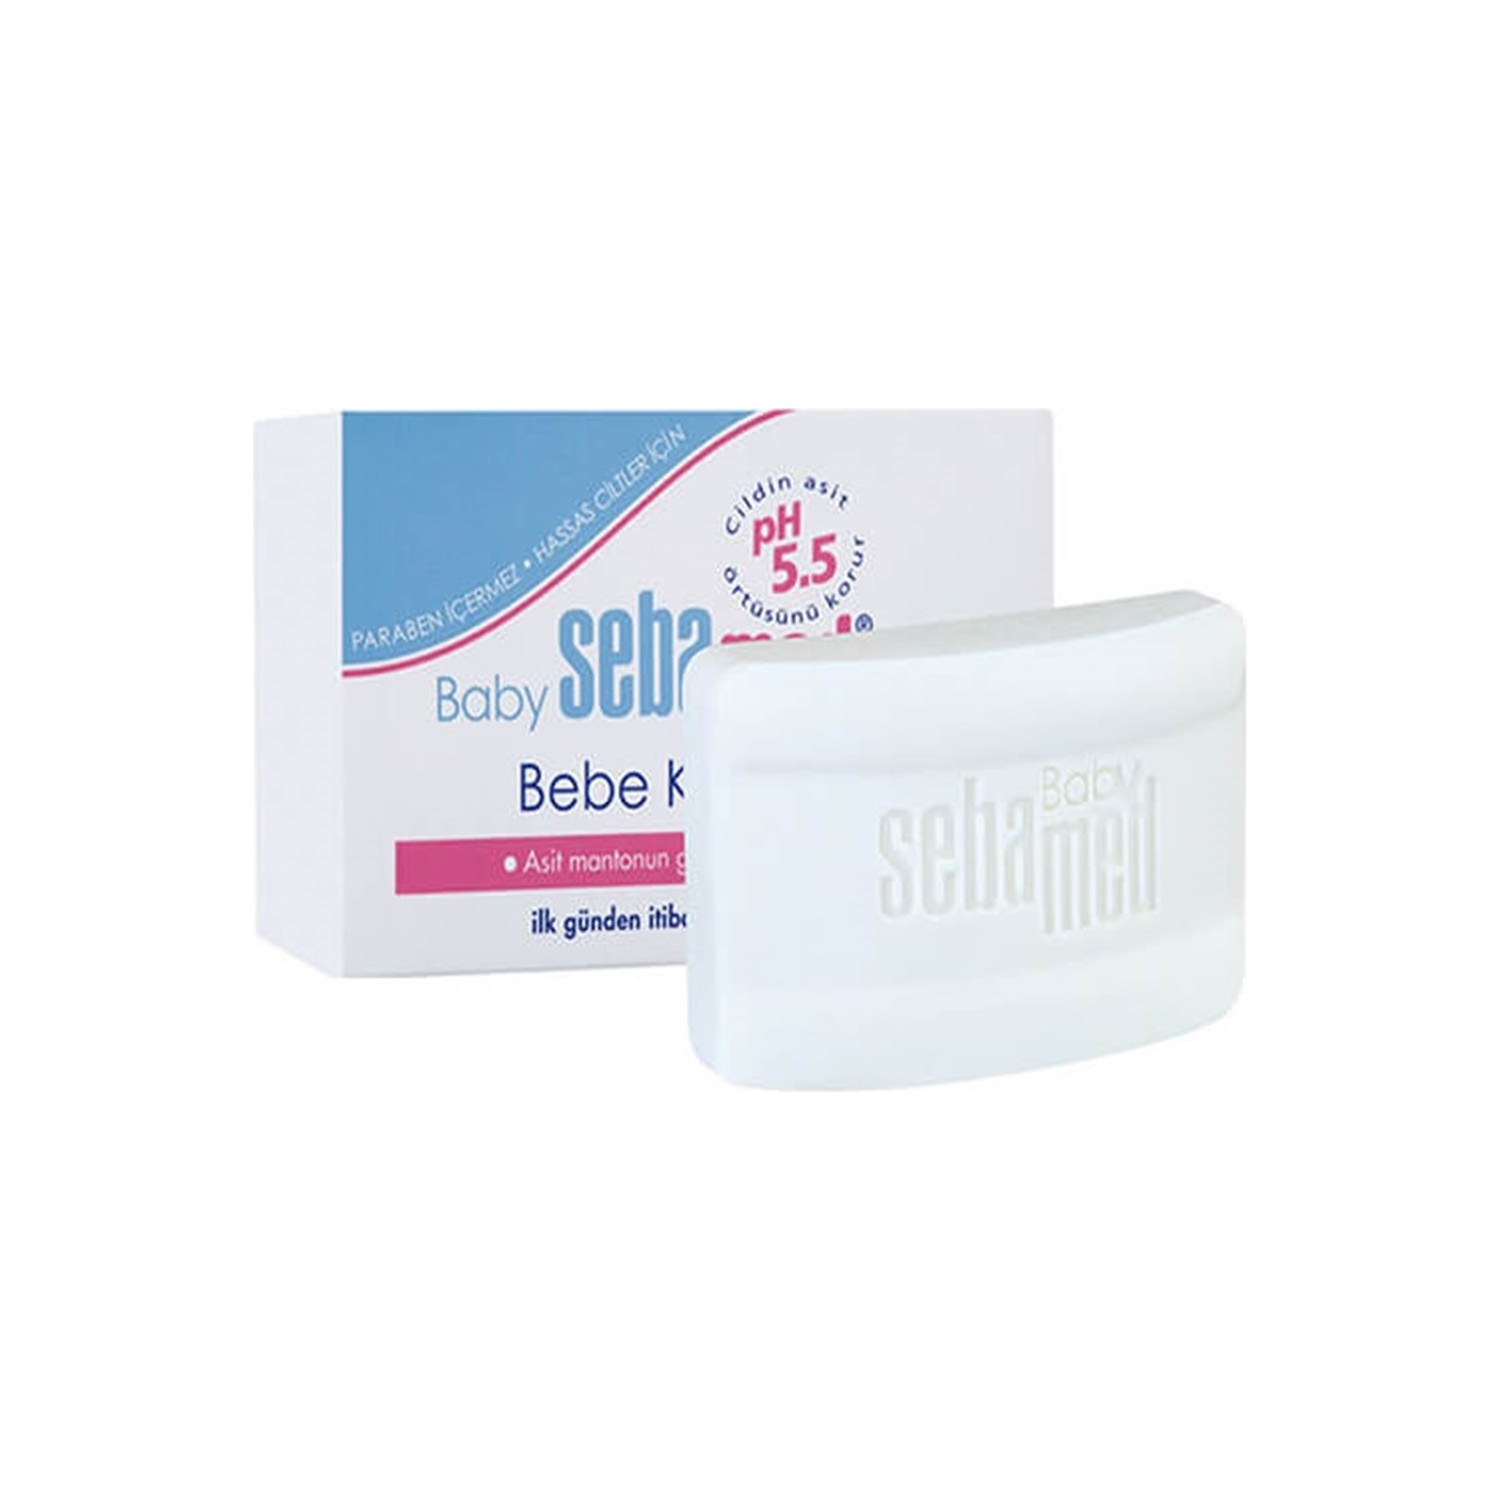 sebamed baby cleansing soap bar with panthenol 3 5 oz 100 g x 2 pcs Детское мыло Sebamed Baby Compact